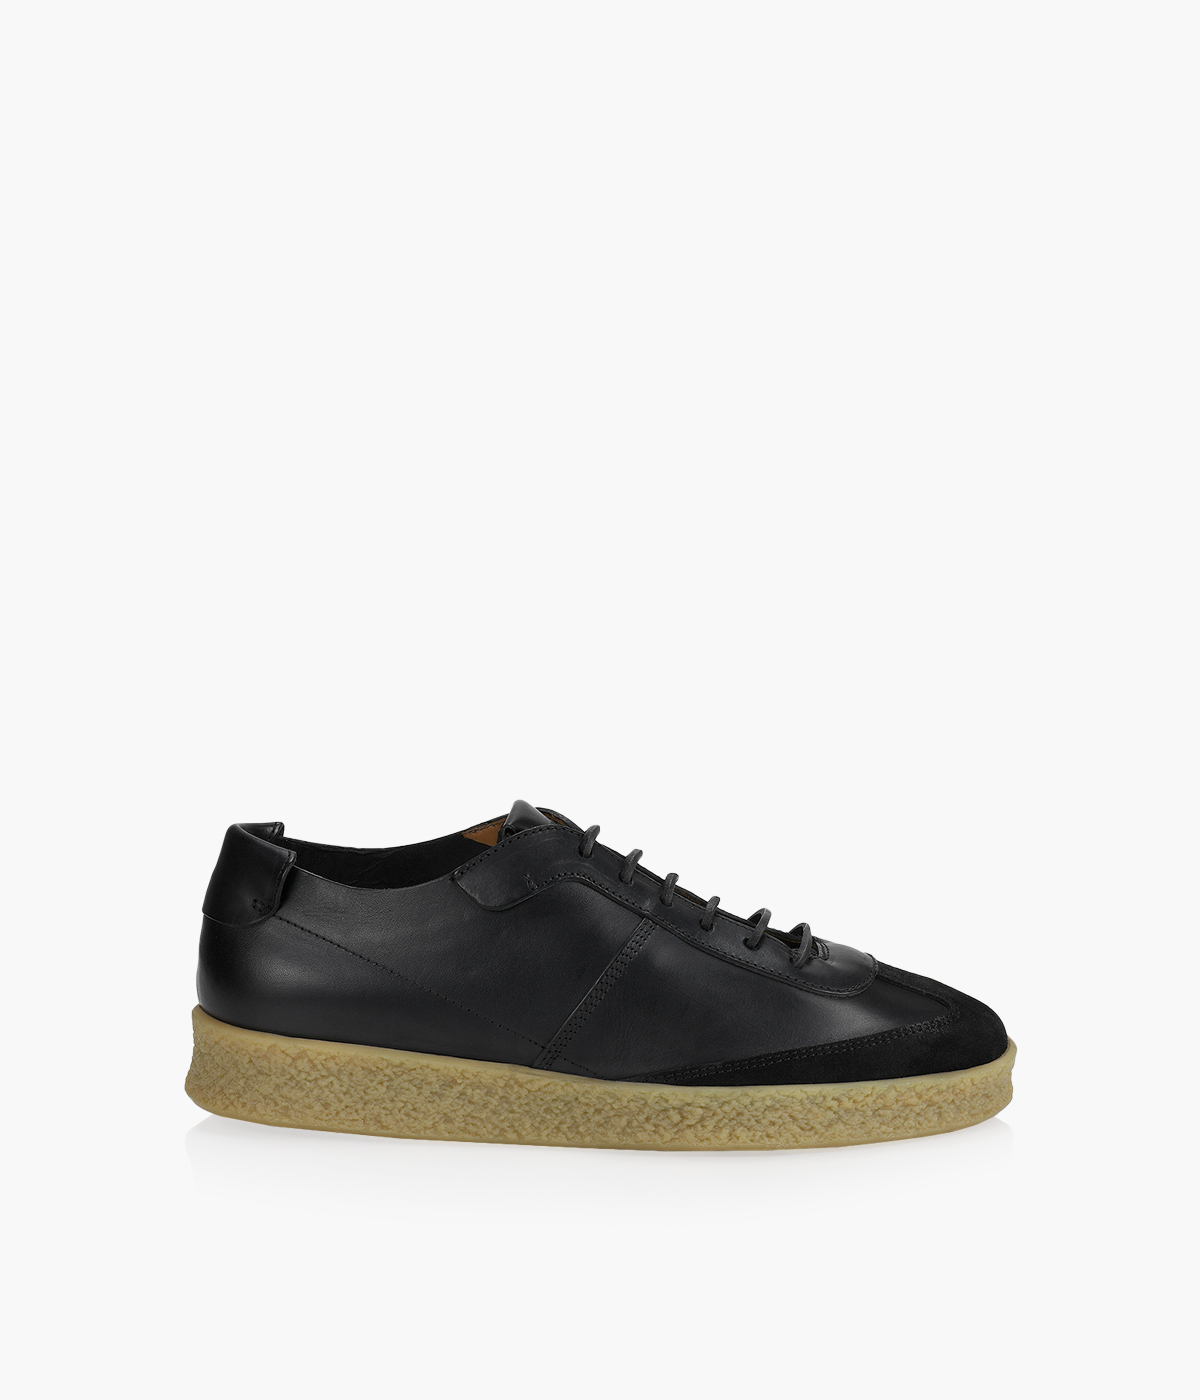 BUTTERO CRESPO - Black Leather | Browns Shoes